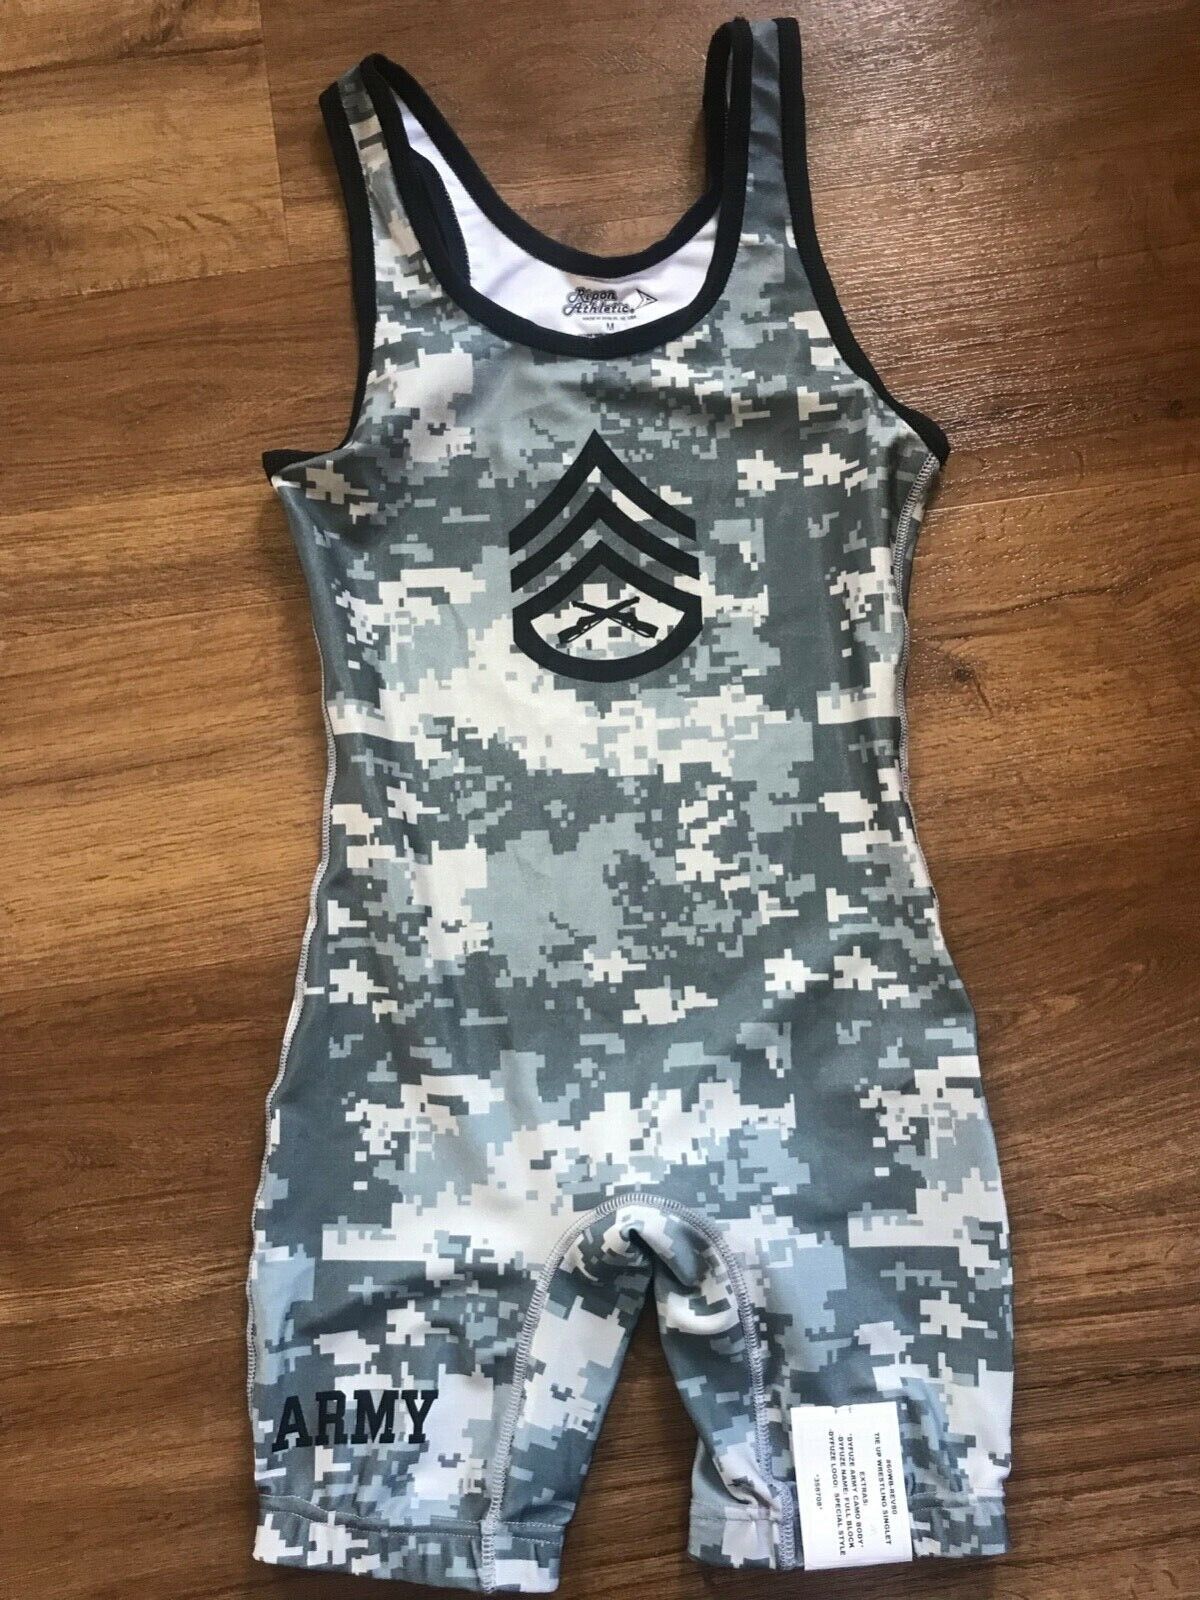 Digital Camo Wrestling Singlet Bombing new work Adult Be super welcome “Army” Size M Medium